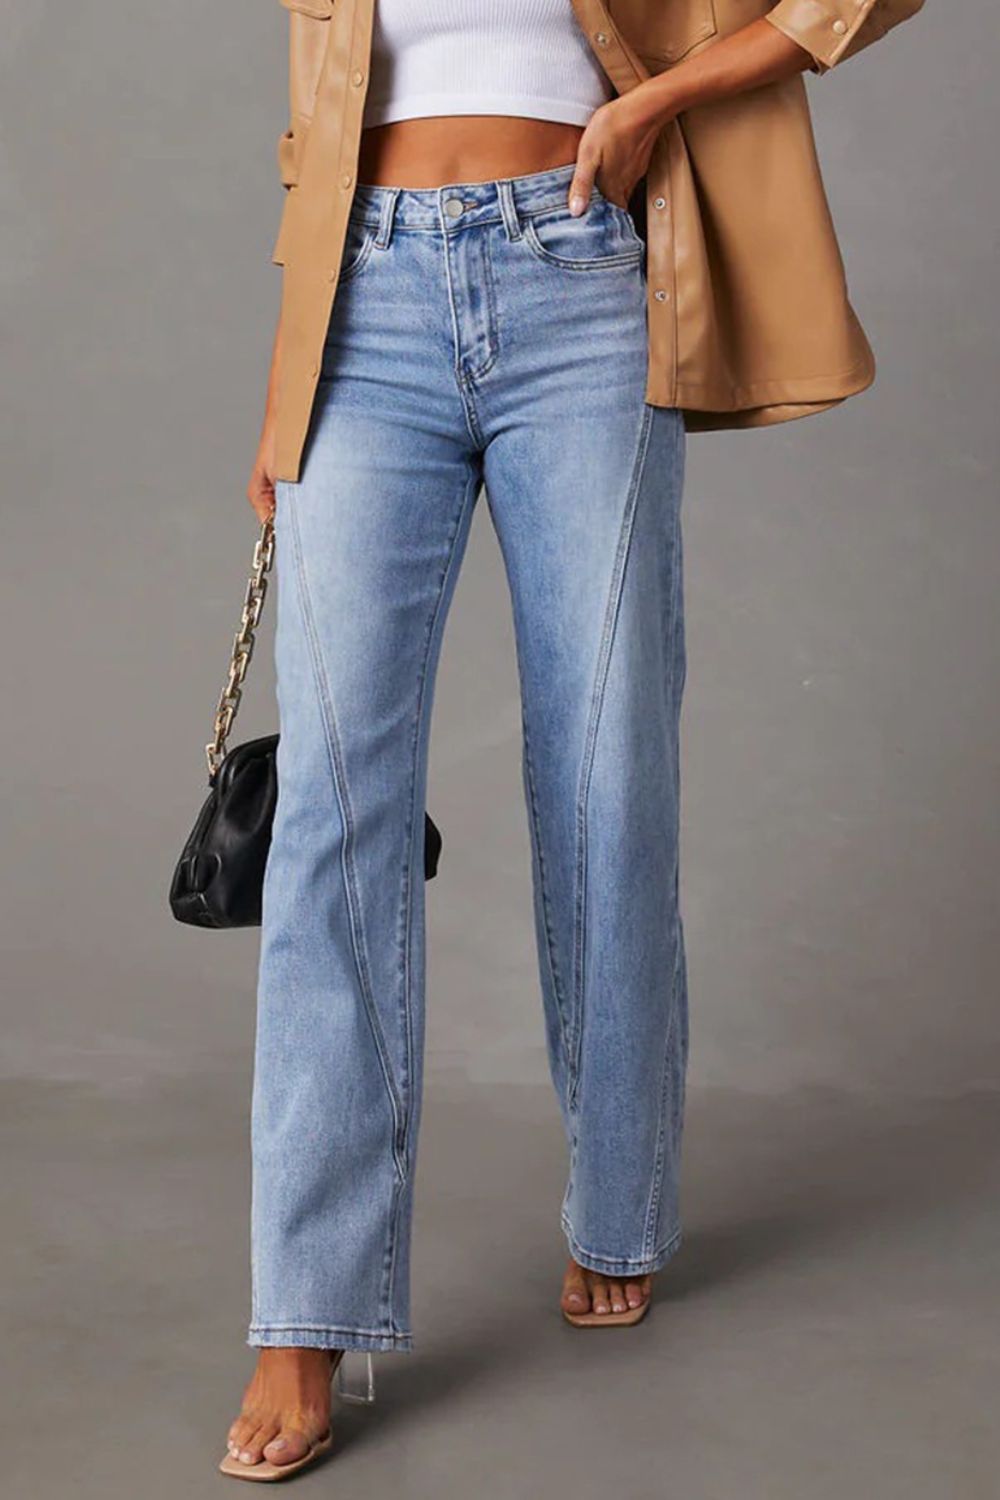 Just BE. Evette High Waist Straight Jeans